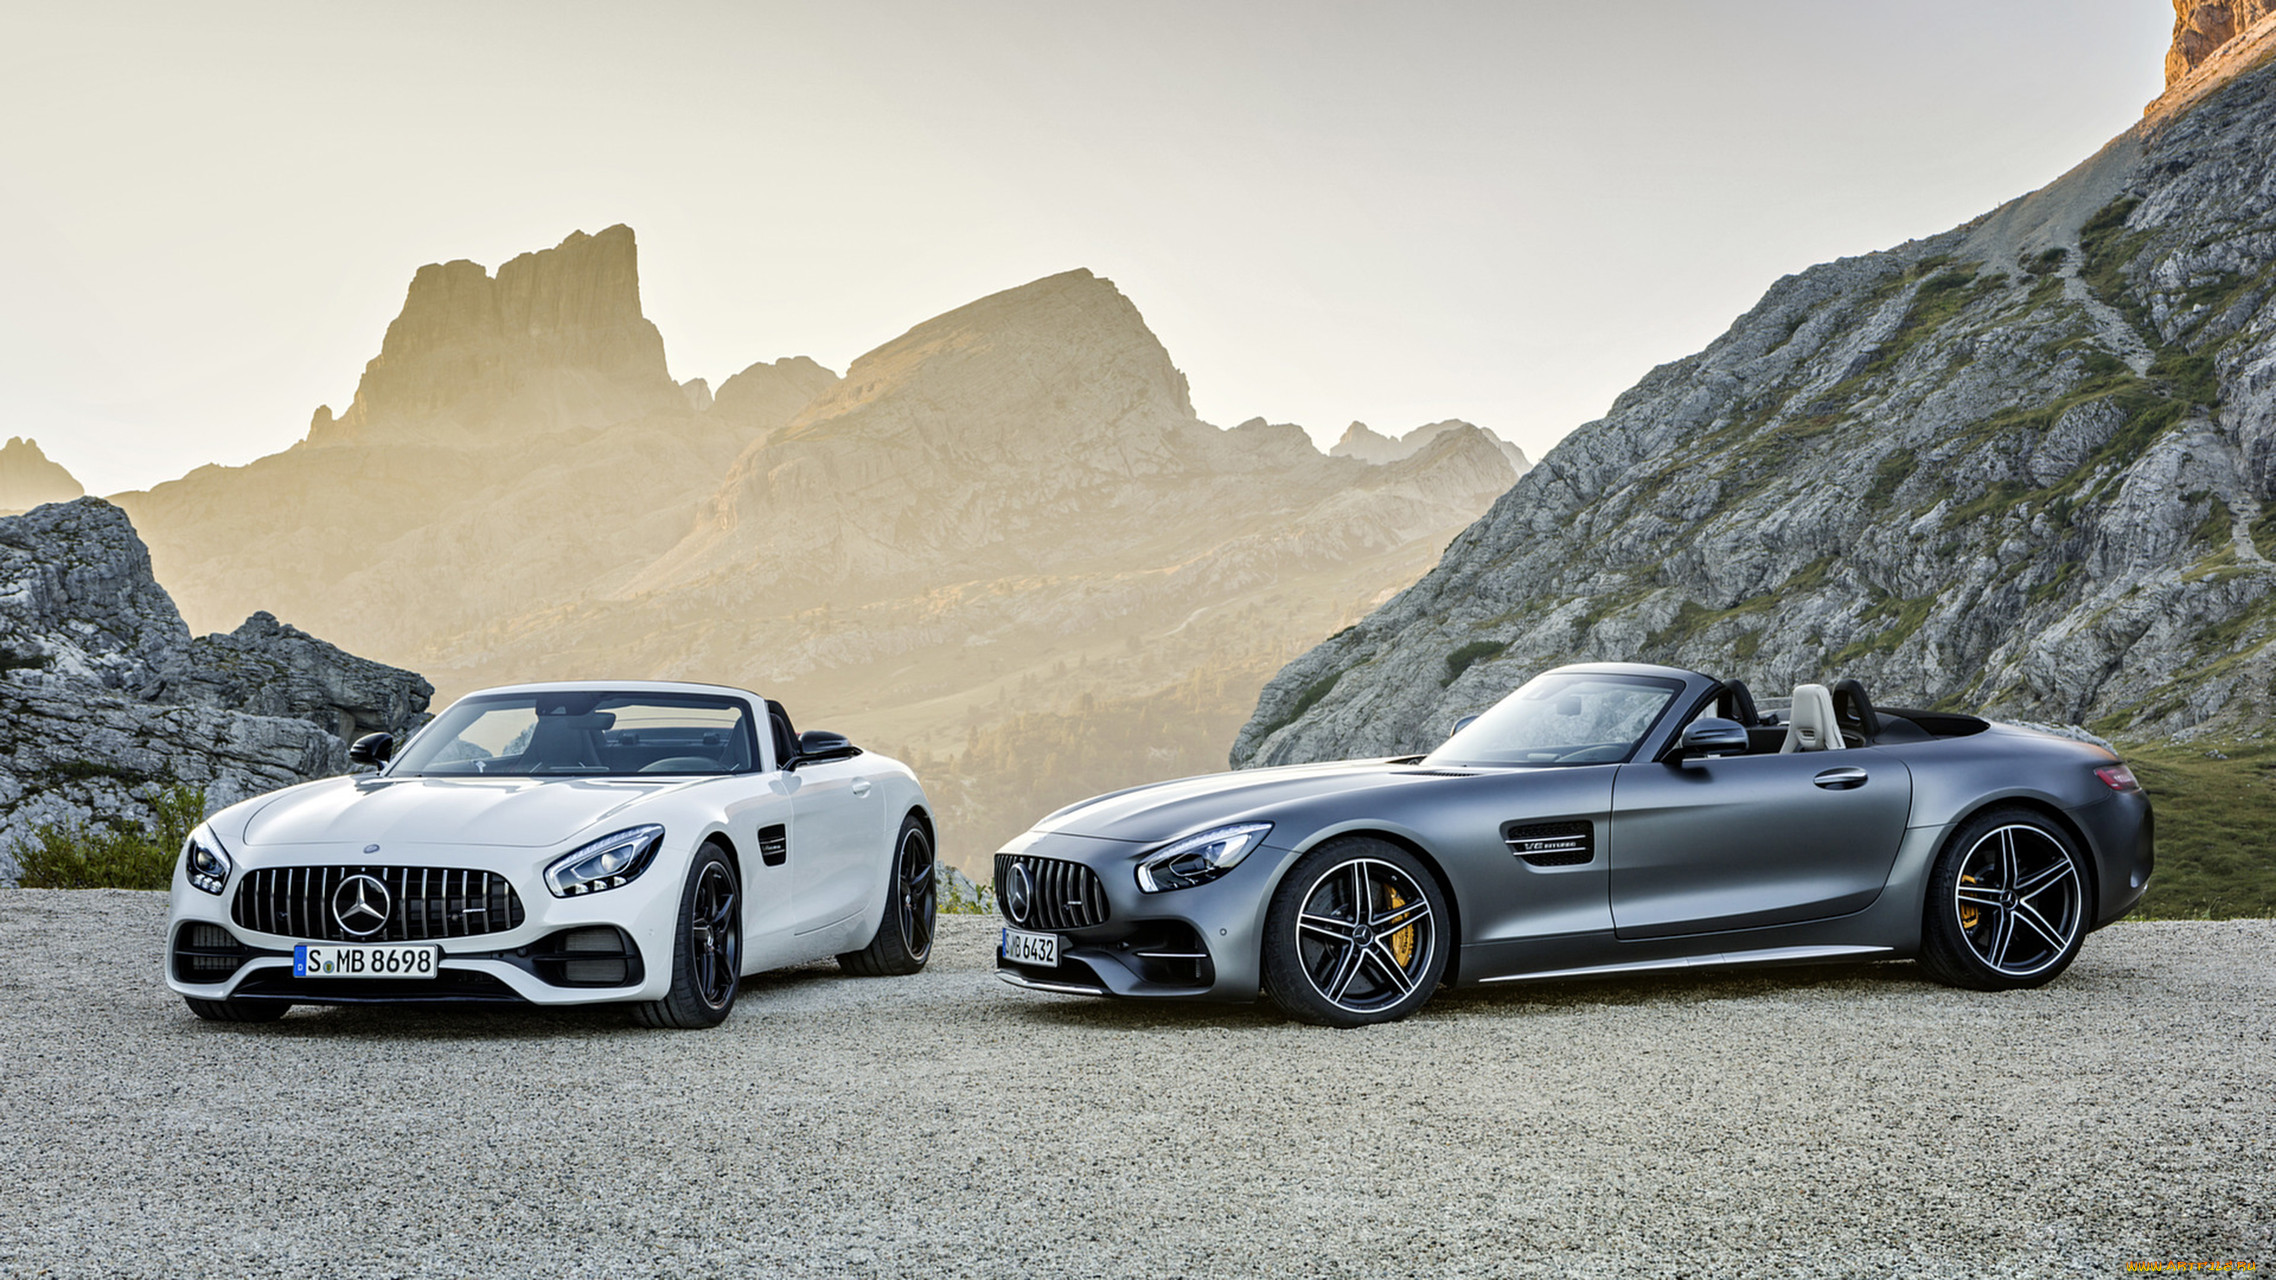 mercedes-benz amg-gt and gt-c roadsters 2018, , mercedes-benz, -roadsters, amg-gt, gt-c, 2018